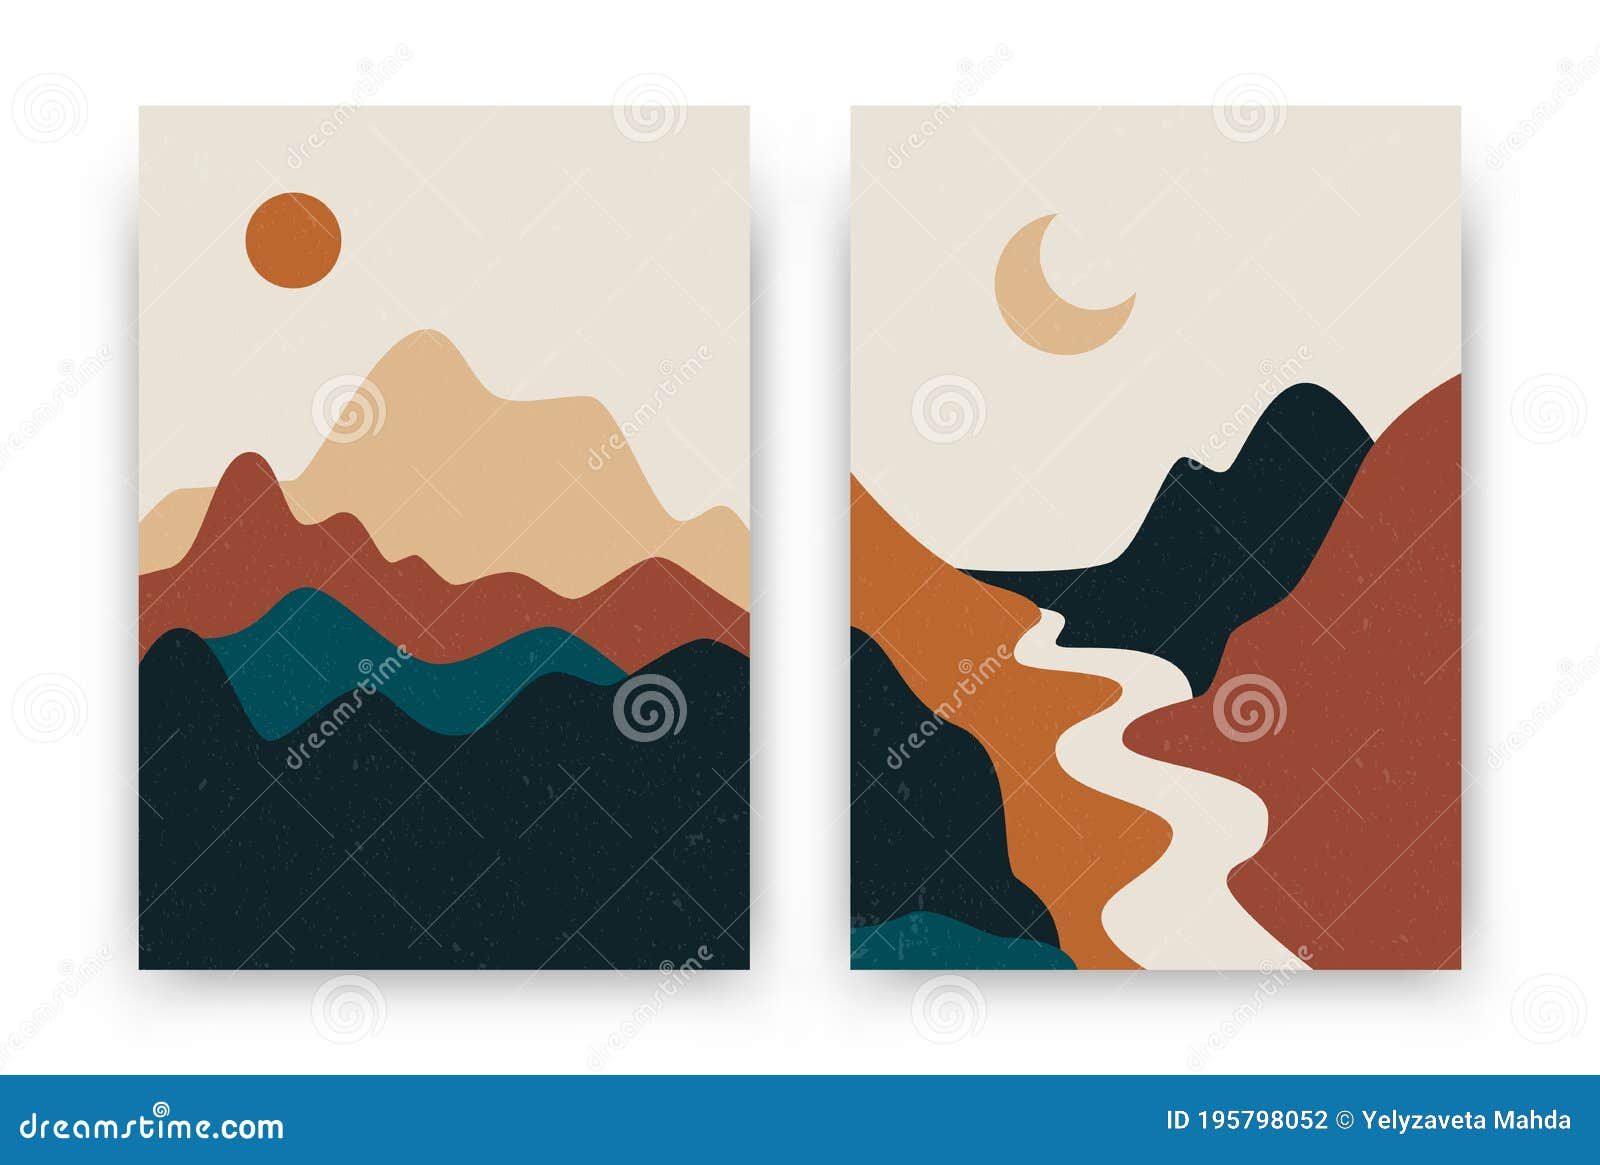 Abstract Landscape Posters Contemporary Boho Background Set Modern Sun Moon Mountains Minimalist Wall Decor Vector Art Print Stock Vector Illustration Of Drawn Aesthetic 195798052